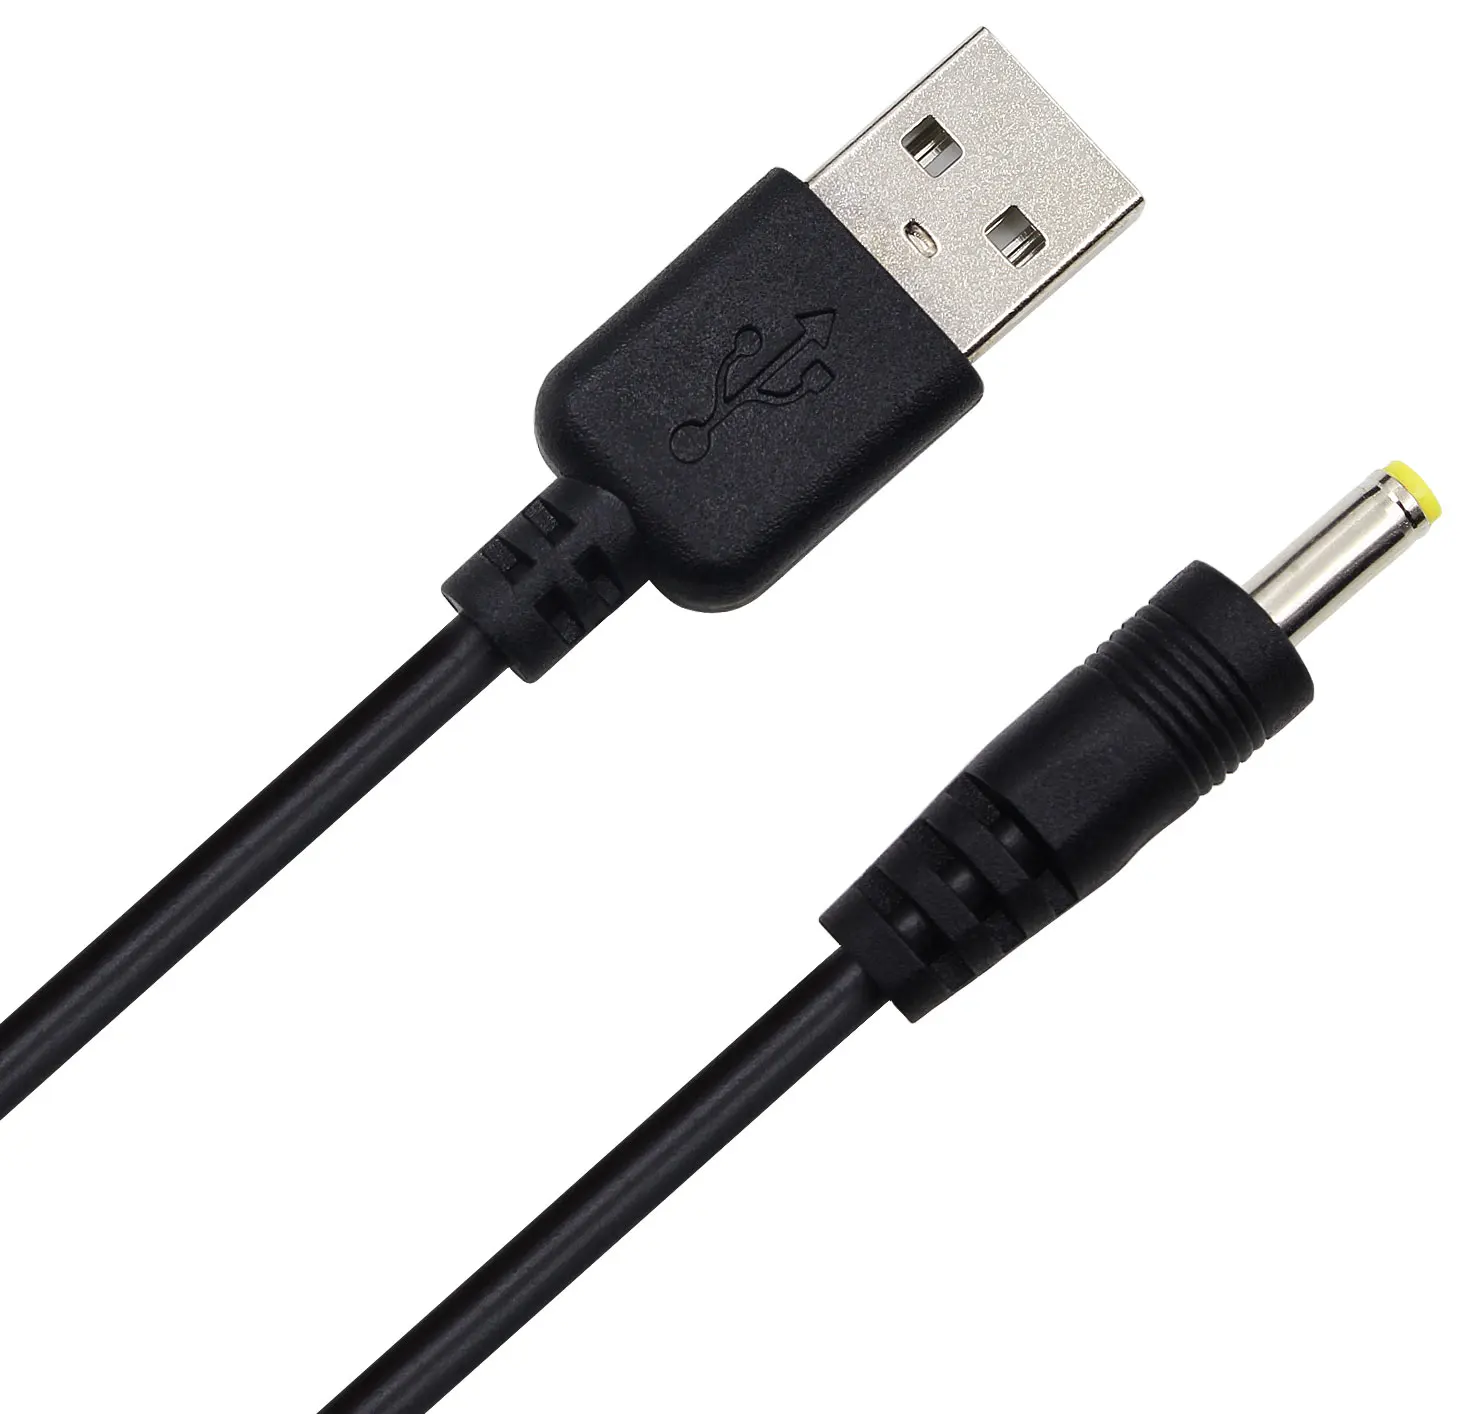 Usb Dc Power Cable For Bluetooth Audio Receiver - Data Cables - AliExpress